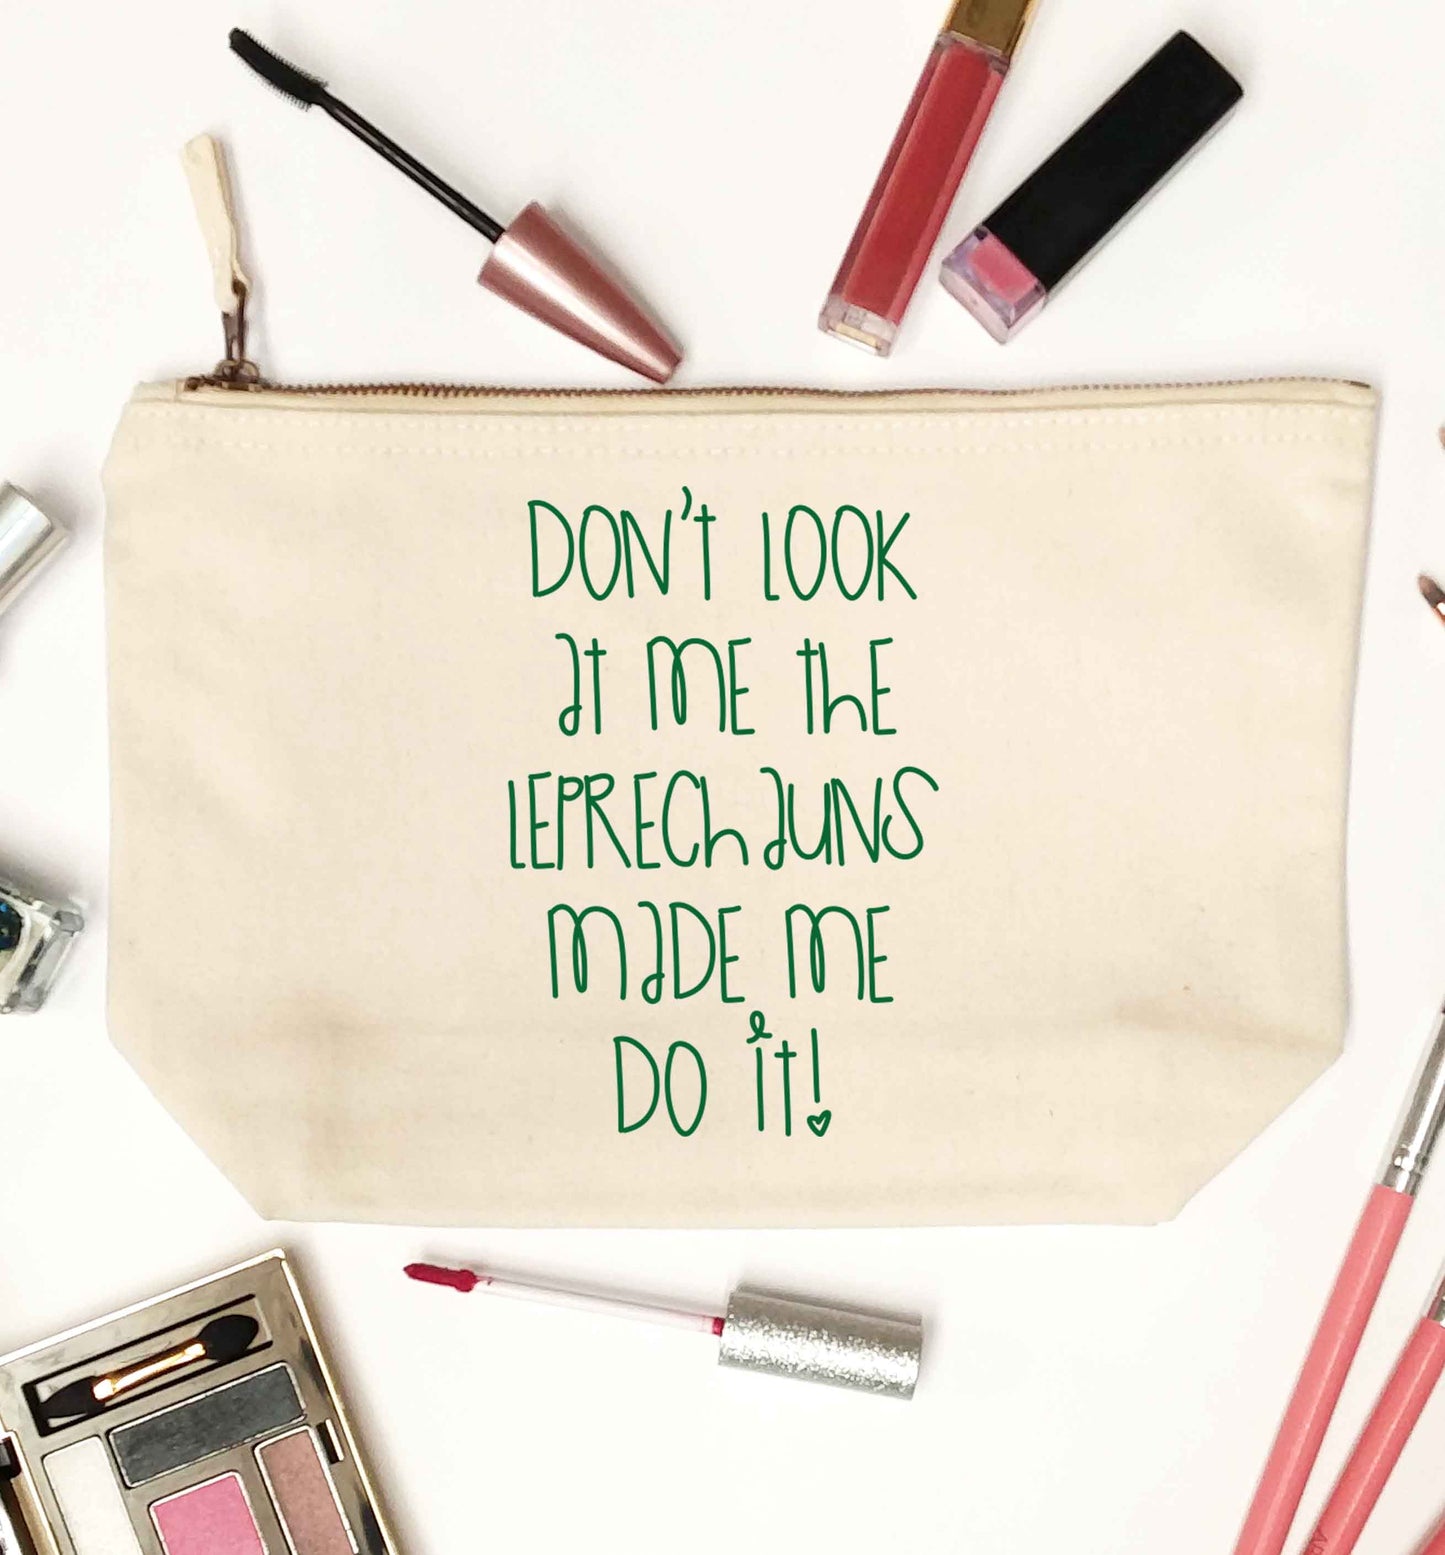 Don't look at me the leprechauns made me do it natural makeup bag